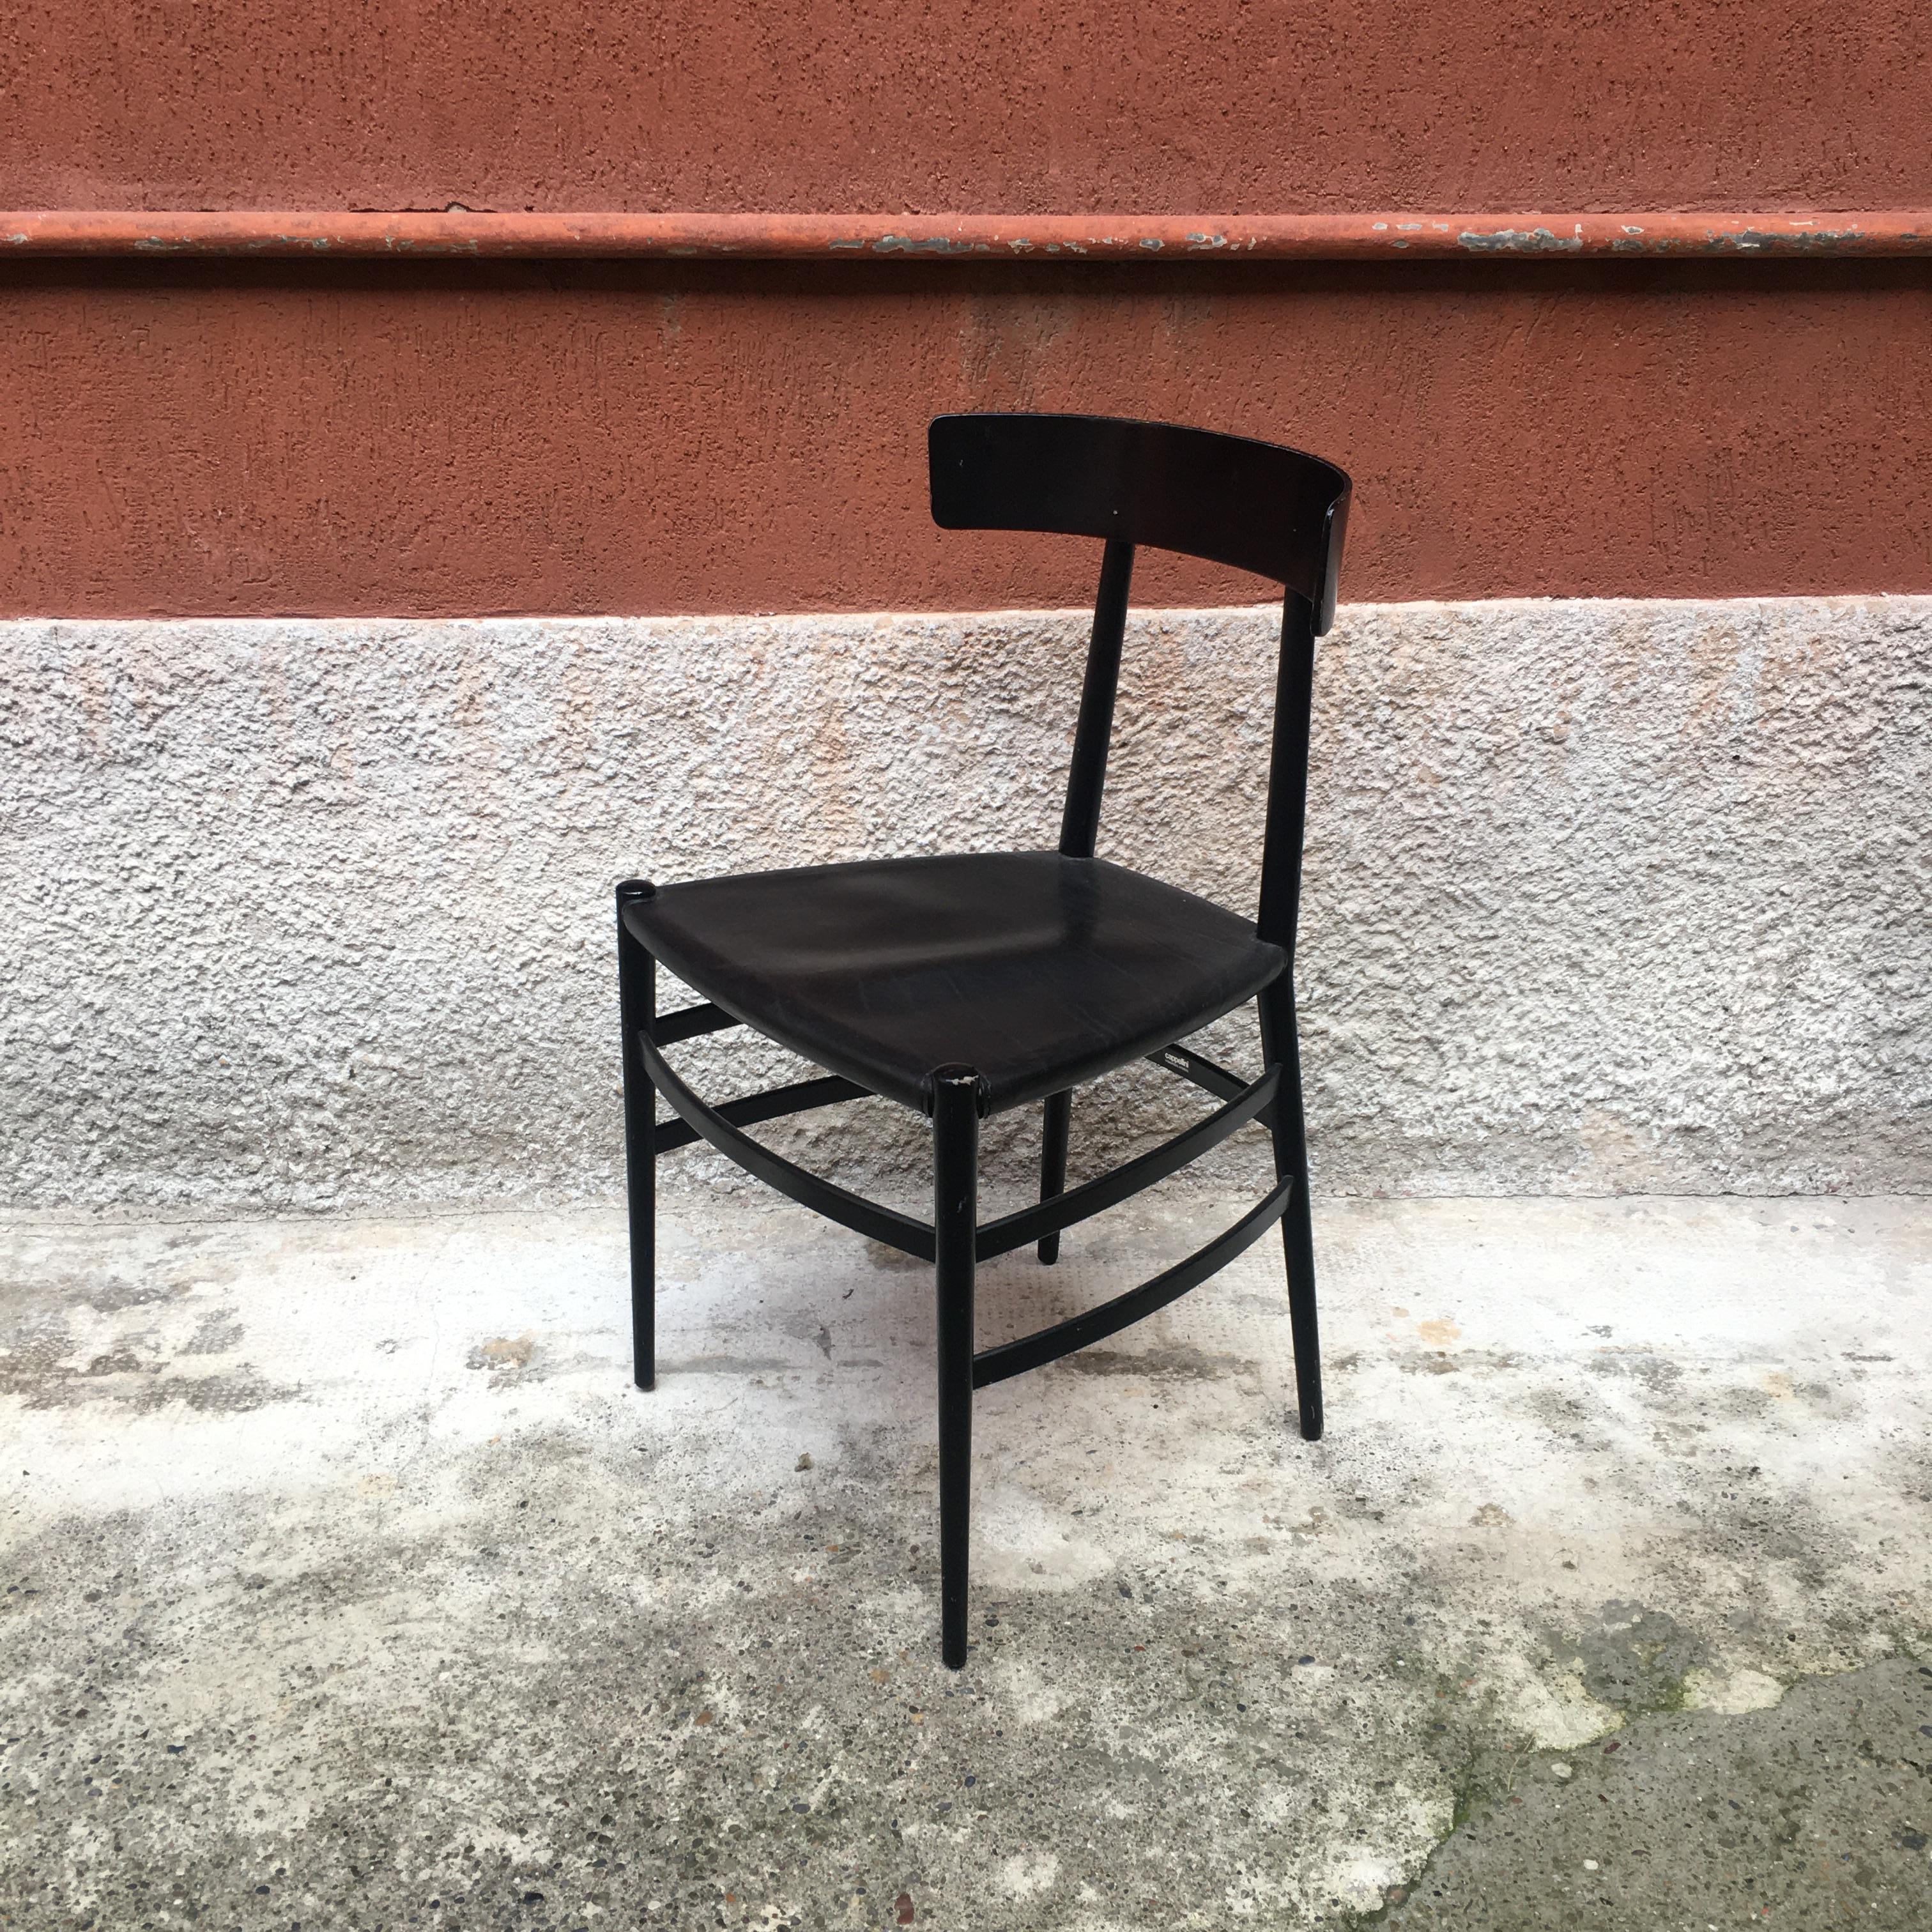 Italian enameled black chair by Cappellini, 1980s
Chair with black enameled wood structure, back and sides curved on each side and leather seat
Produced by Cappellini, 1980s.